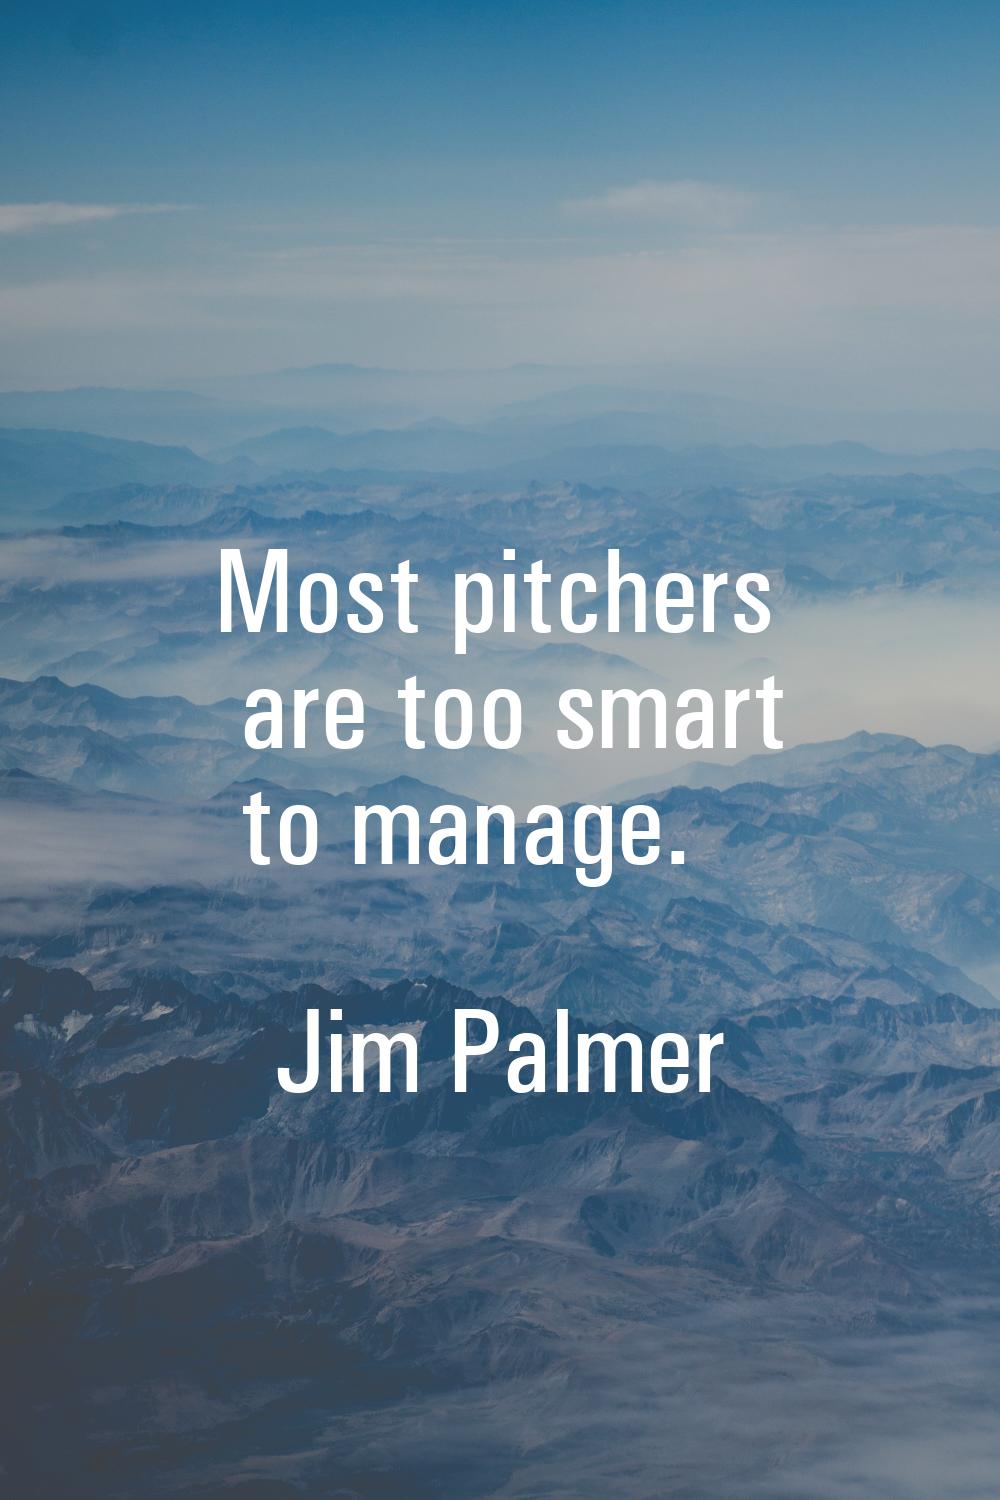 Most pitchers are too smart to manage.